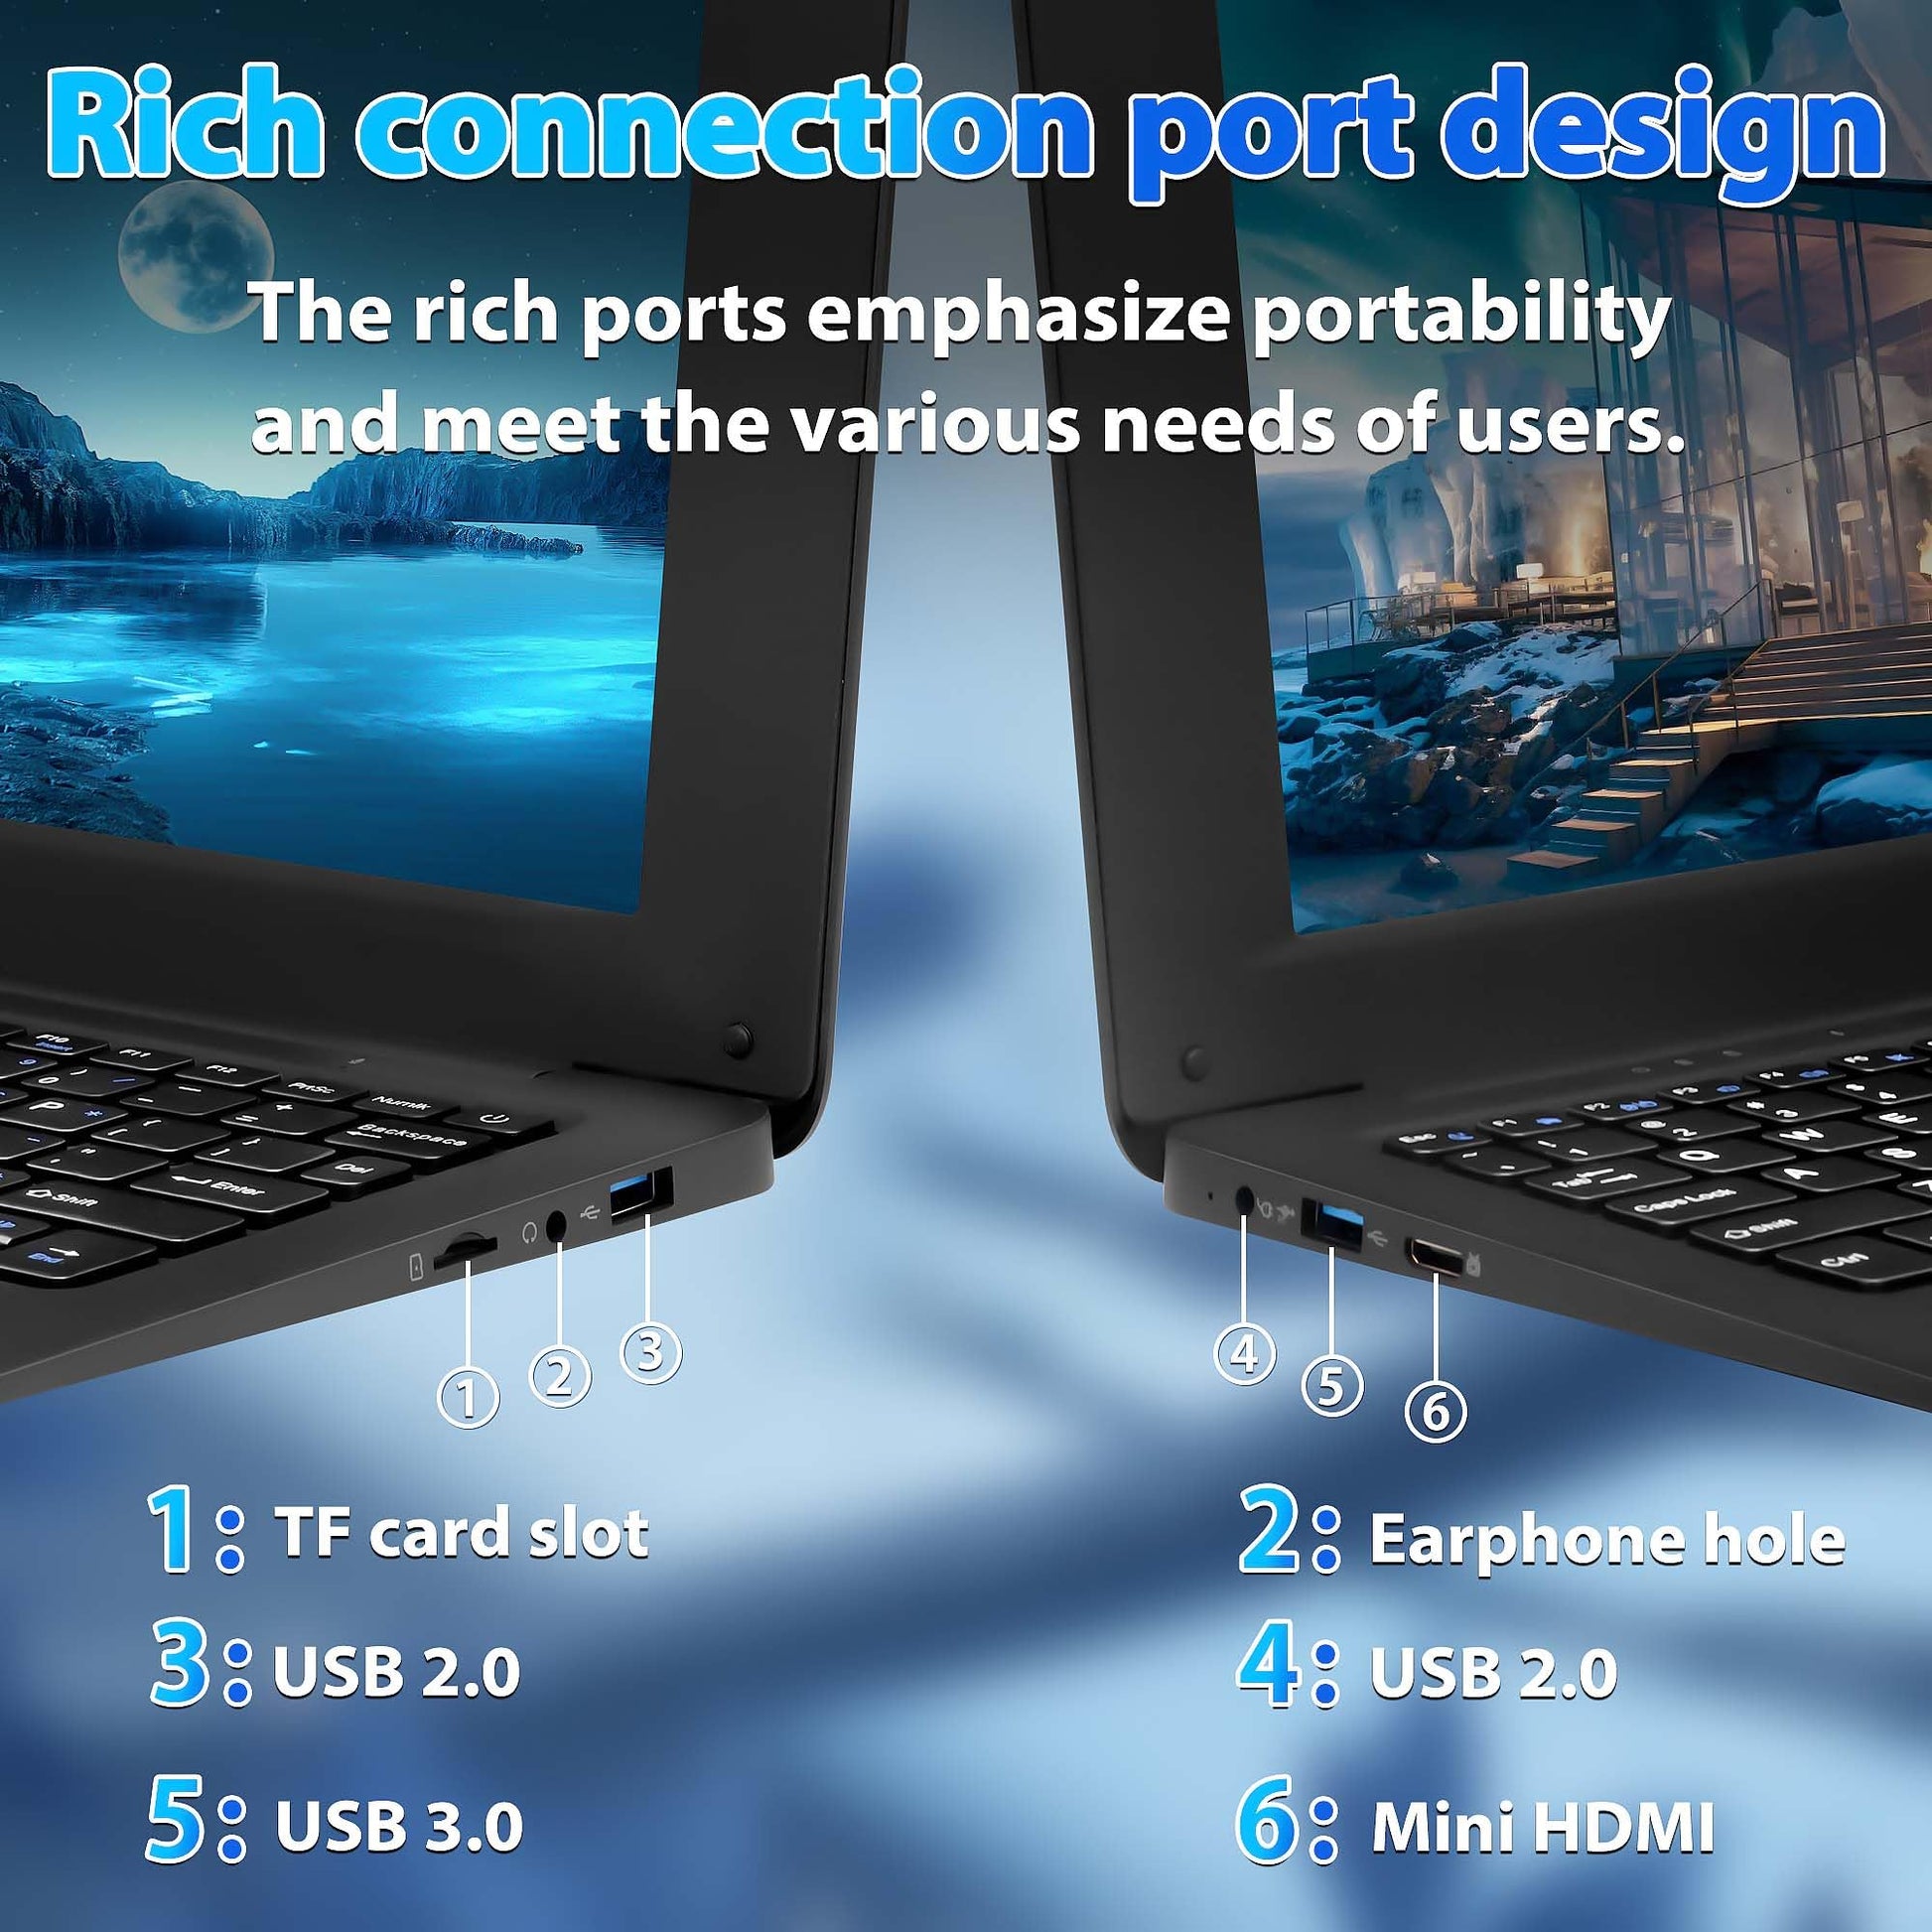 【Win10/Office2019】 10.1'' Compact Mini Laptop/Only 0.8kg / Lightweight and Slim/Mute High-Speed Celeron N3350 CPU, 1280 * 800 IPS, 3GB RAM/64GB ROM,for Beginners, Students, Business and Travel,Black